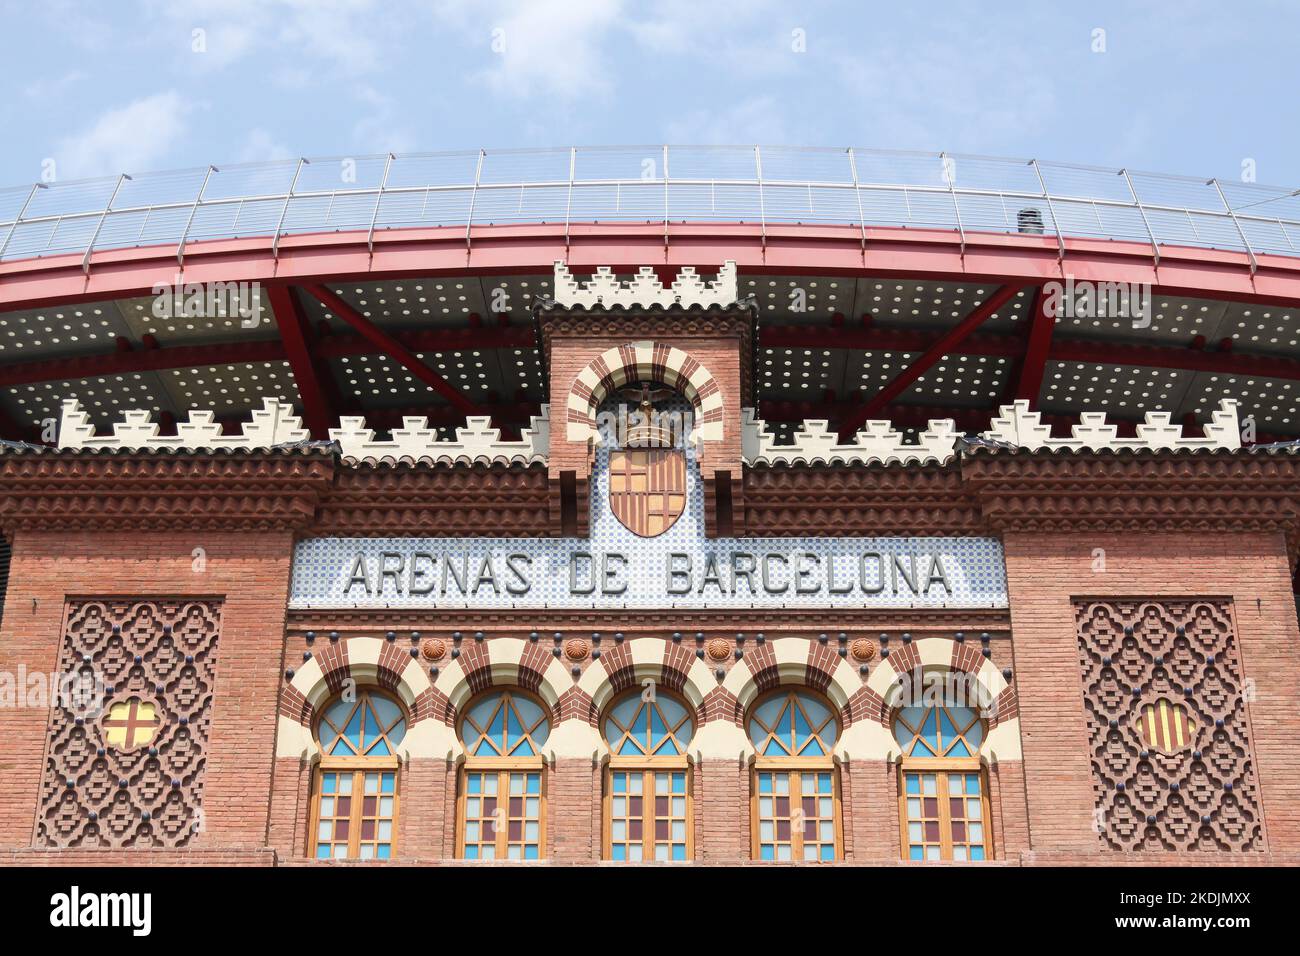 Barcelona, Spain - July 18, 2013: Arenas de Barcelona building. The building was reopened in 2011 as a shopping mall named Arenas de Barcelona Stock Photo